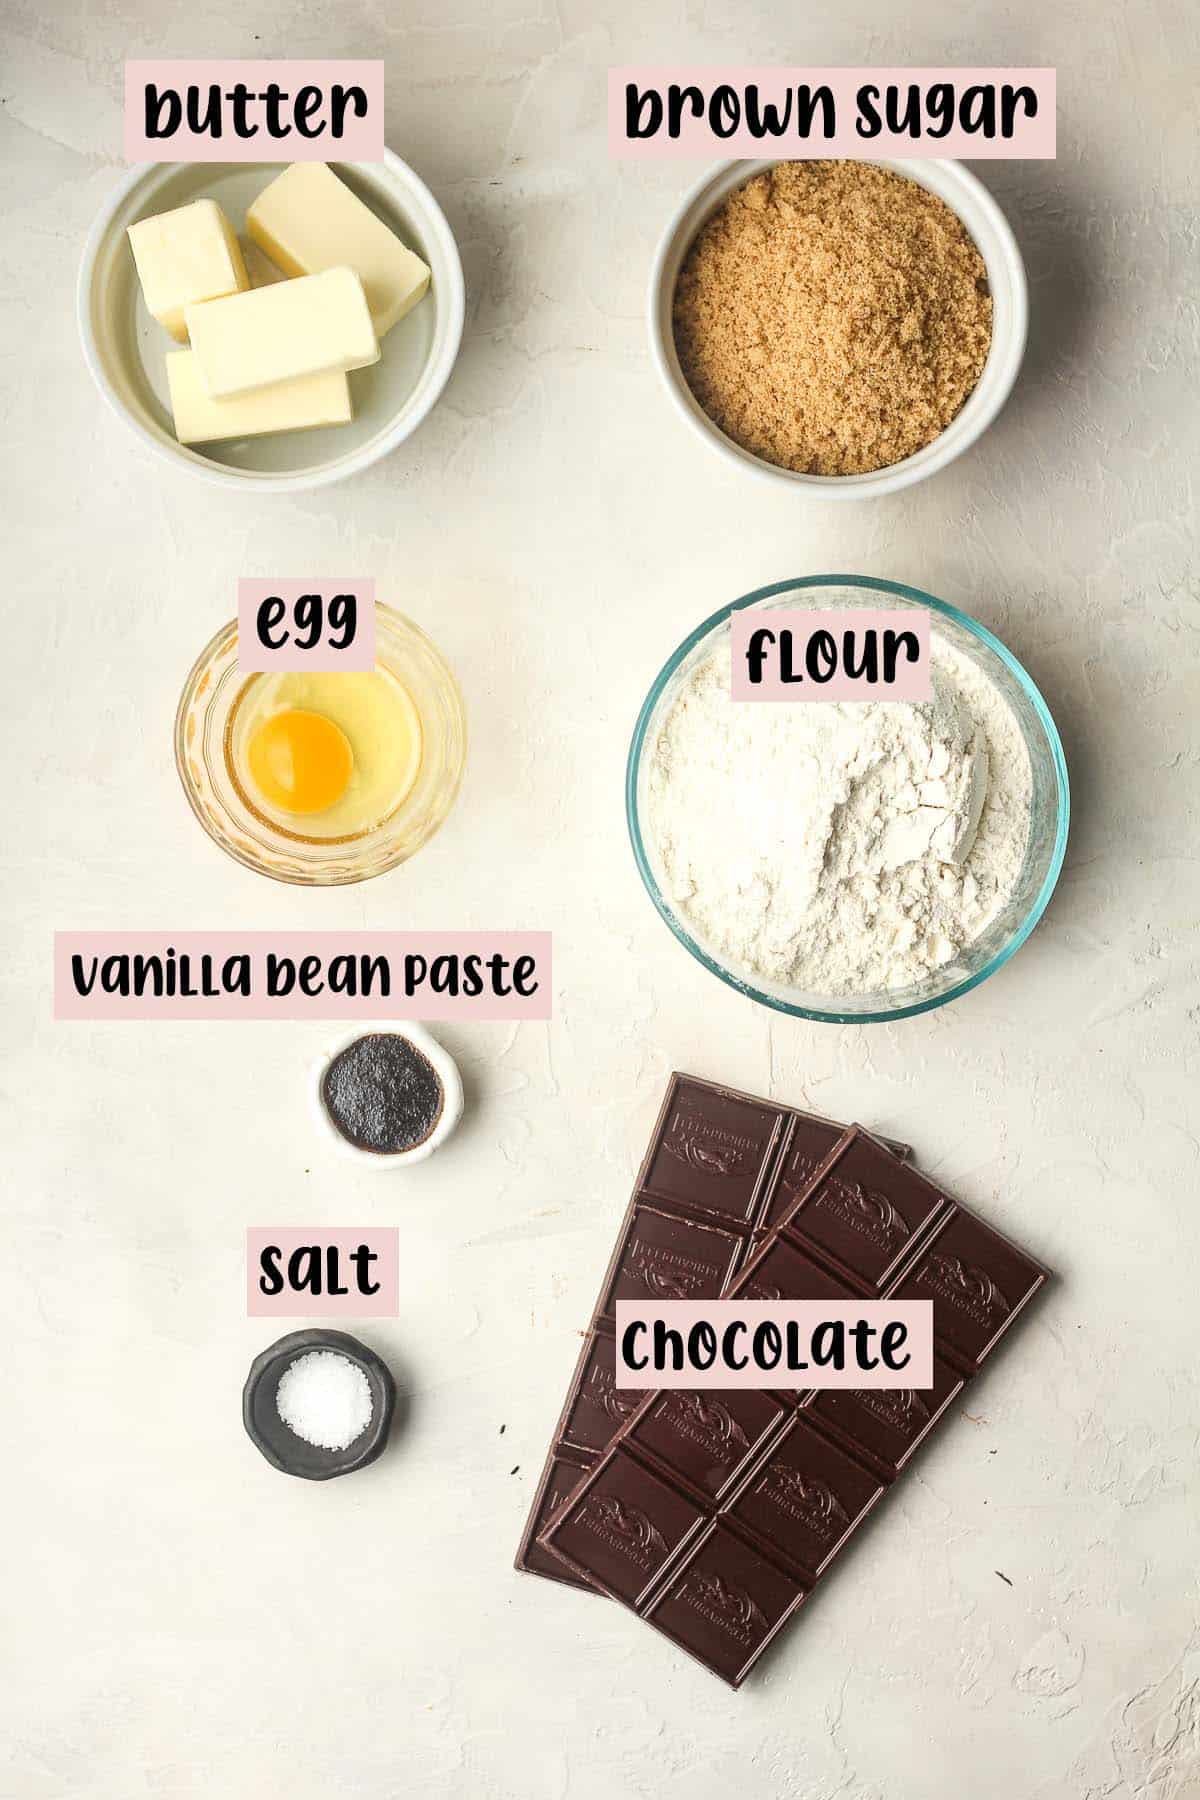 Labeled ingredients for the chocolate dipped shortbread cookies.